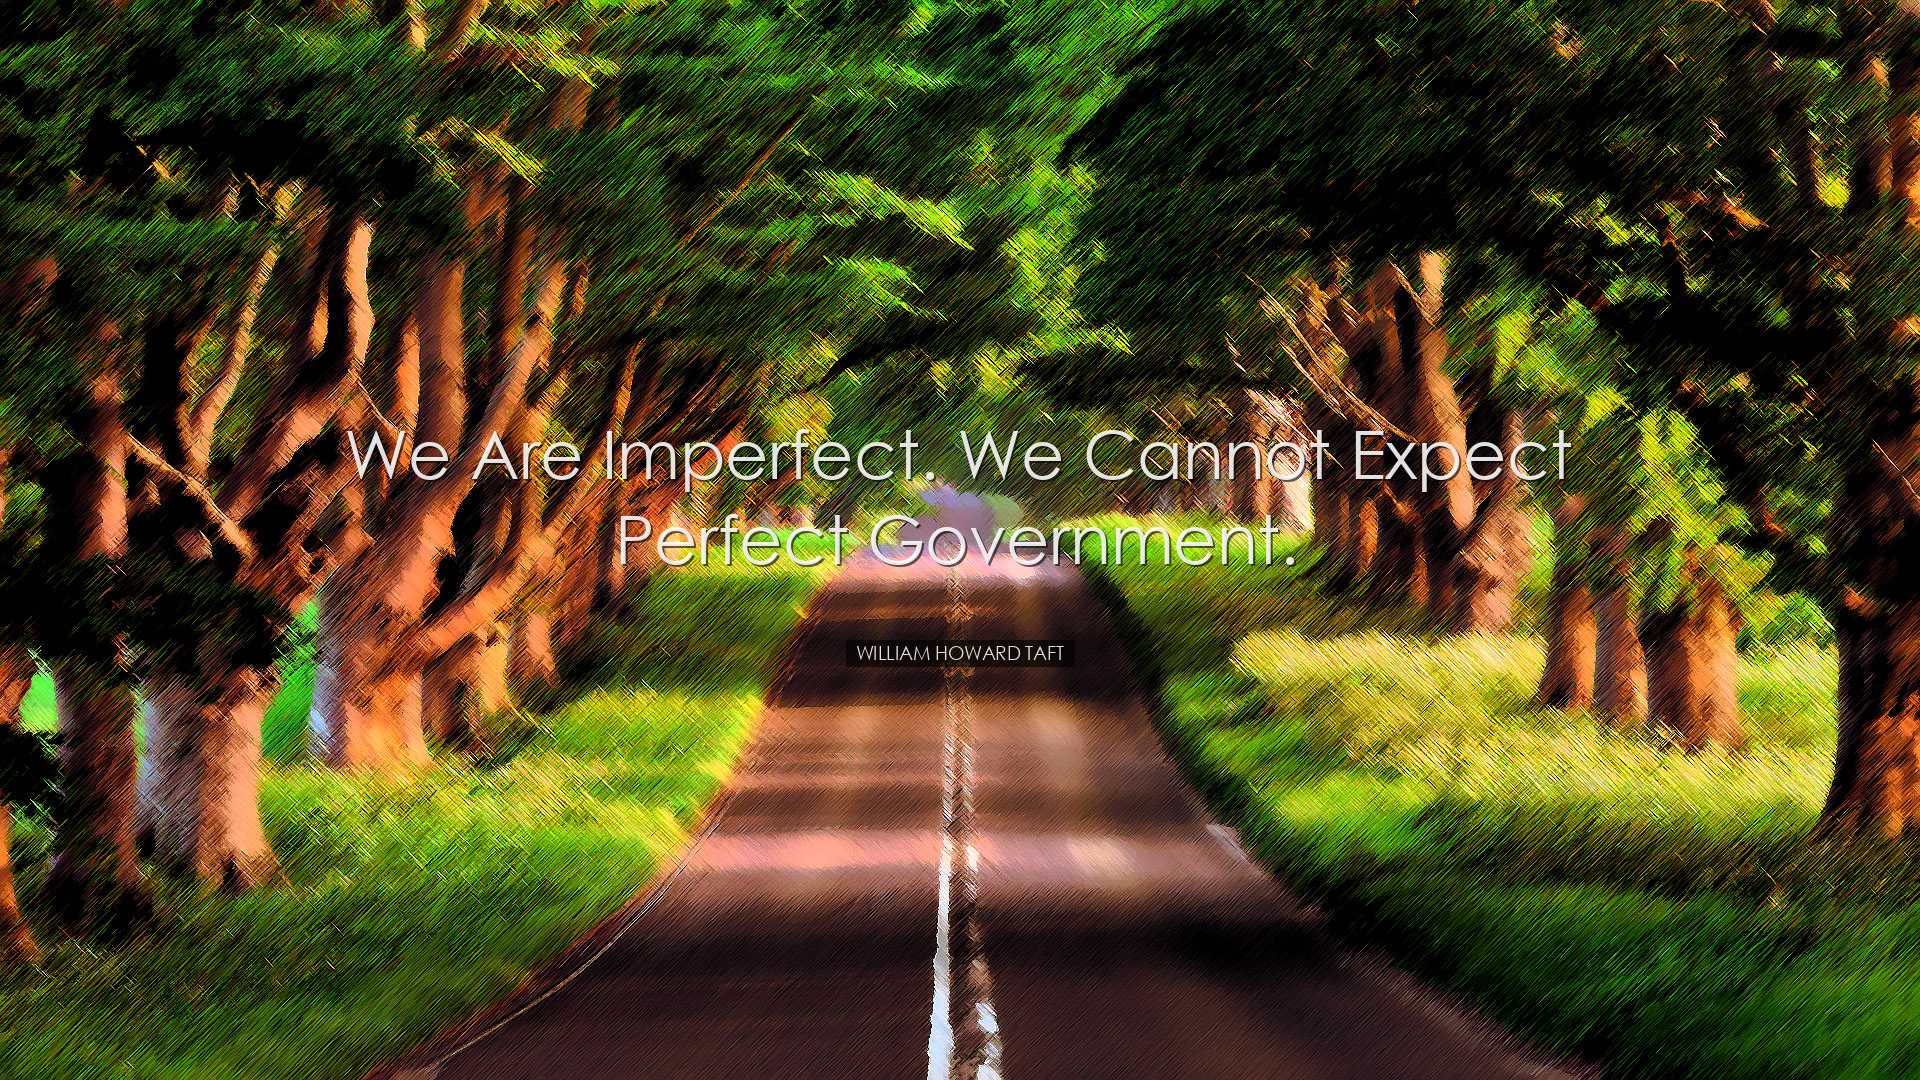 We are imperfect. We cannot expect perfect government. - William H